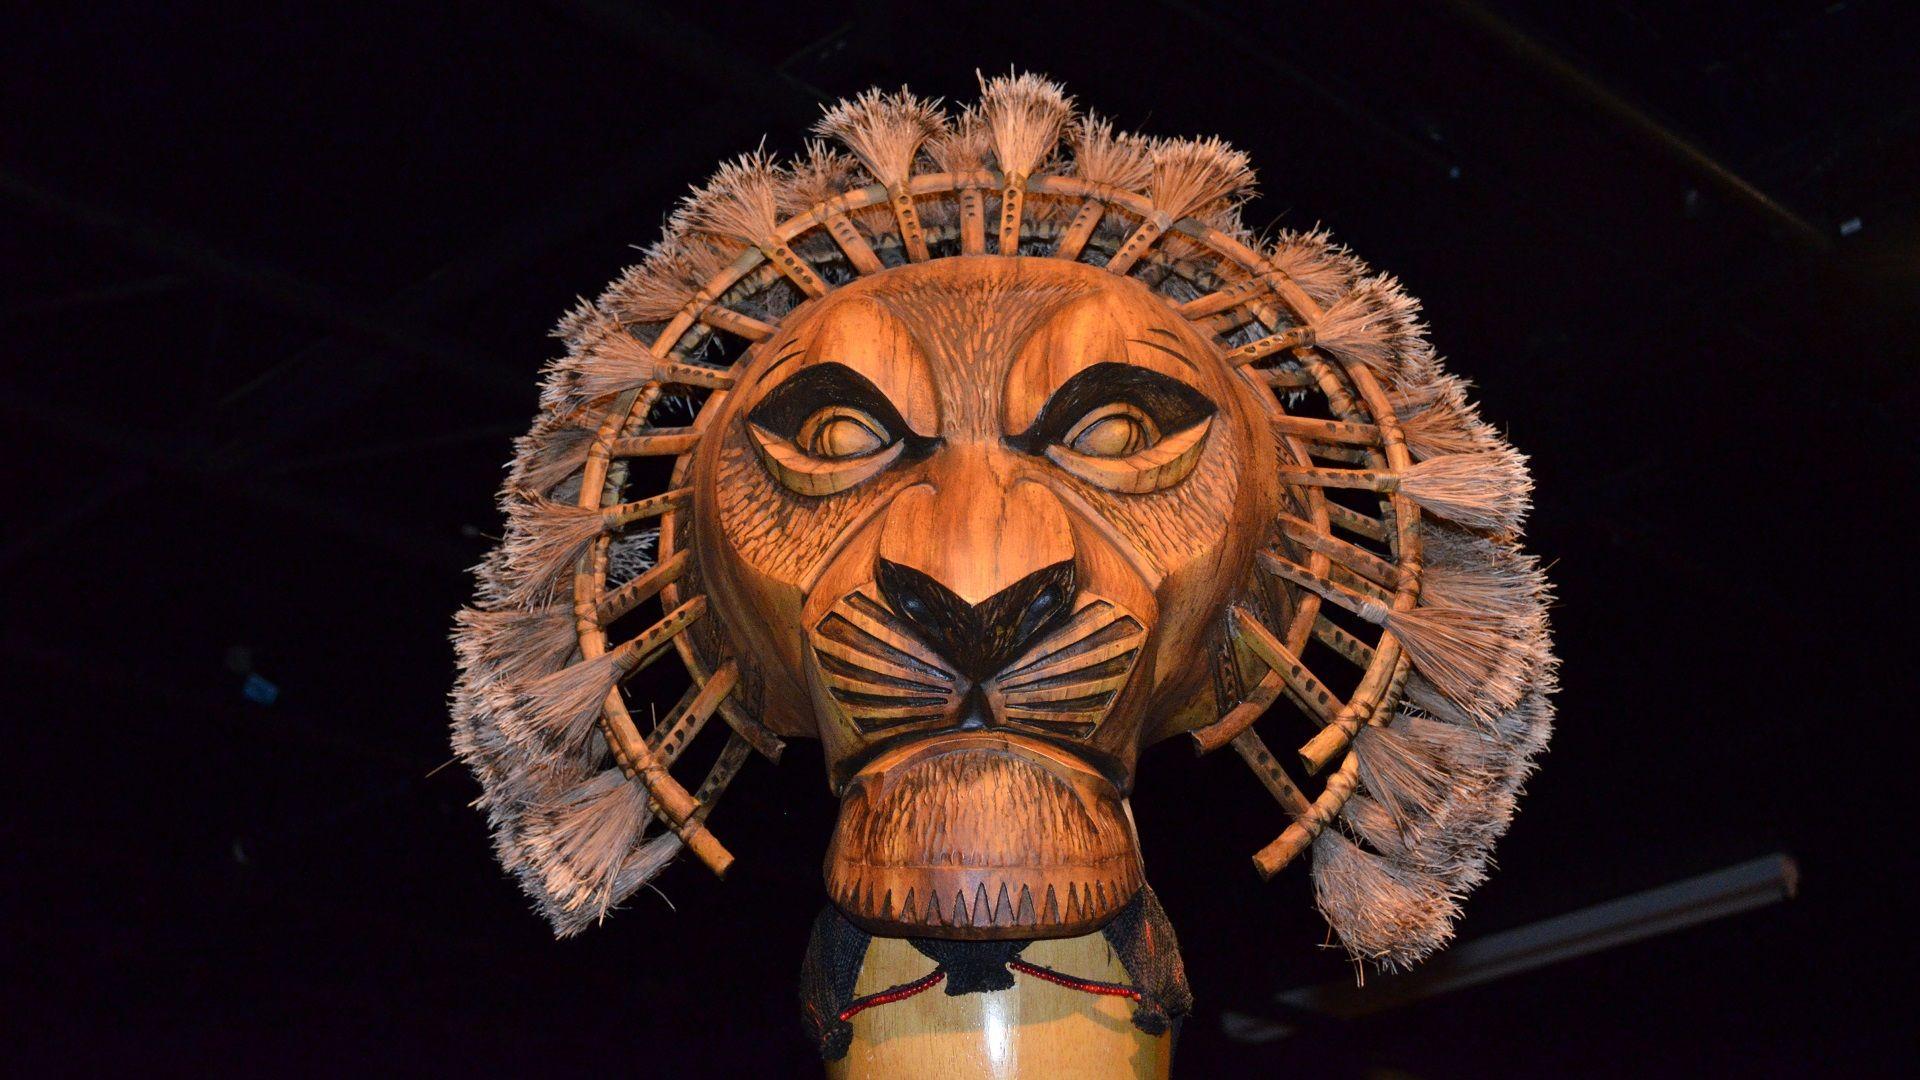 Mufasa Mask From The Lion King Musical HD Wallpaper. Background